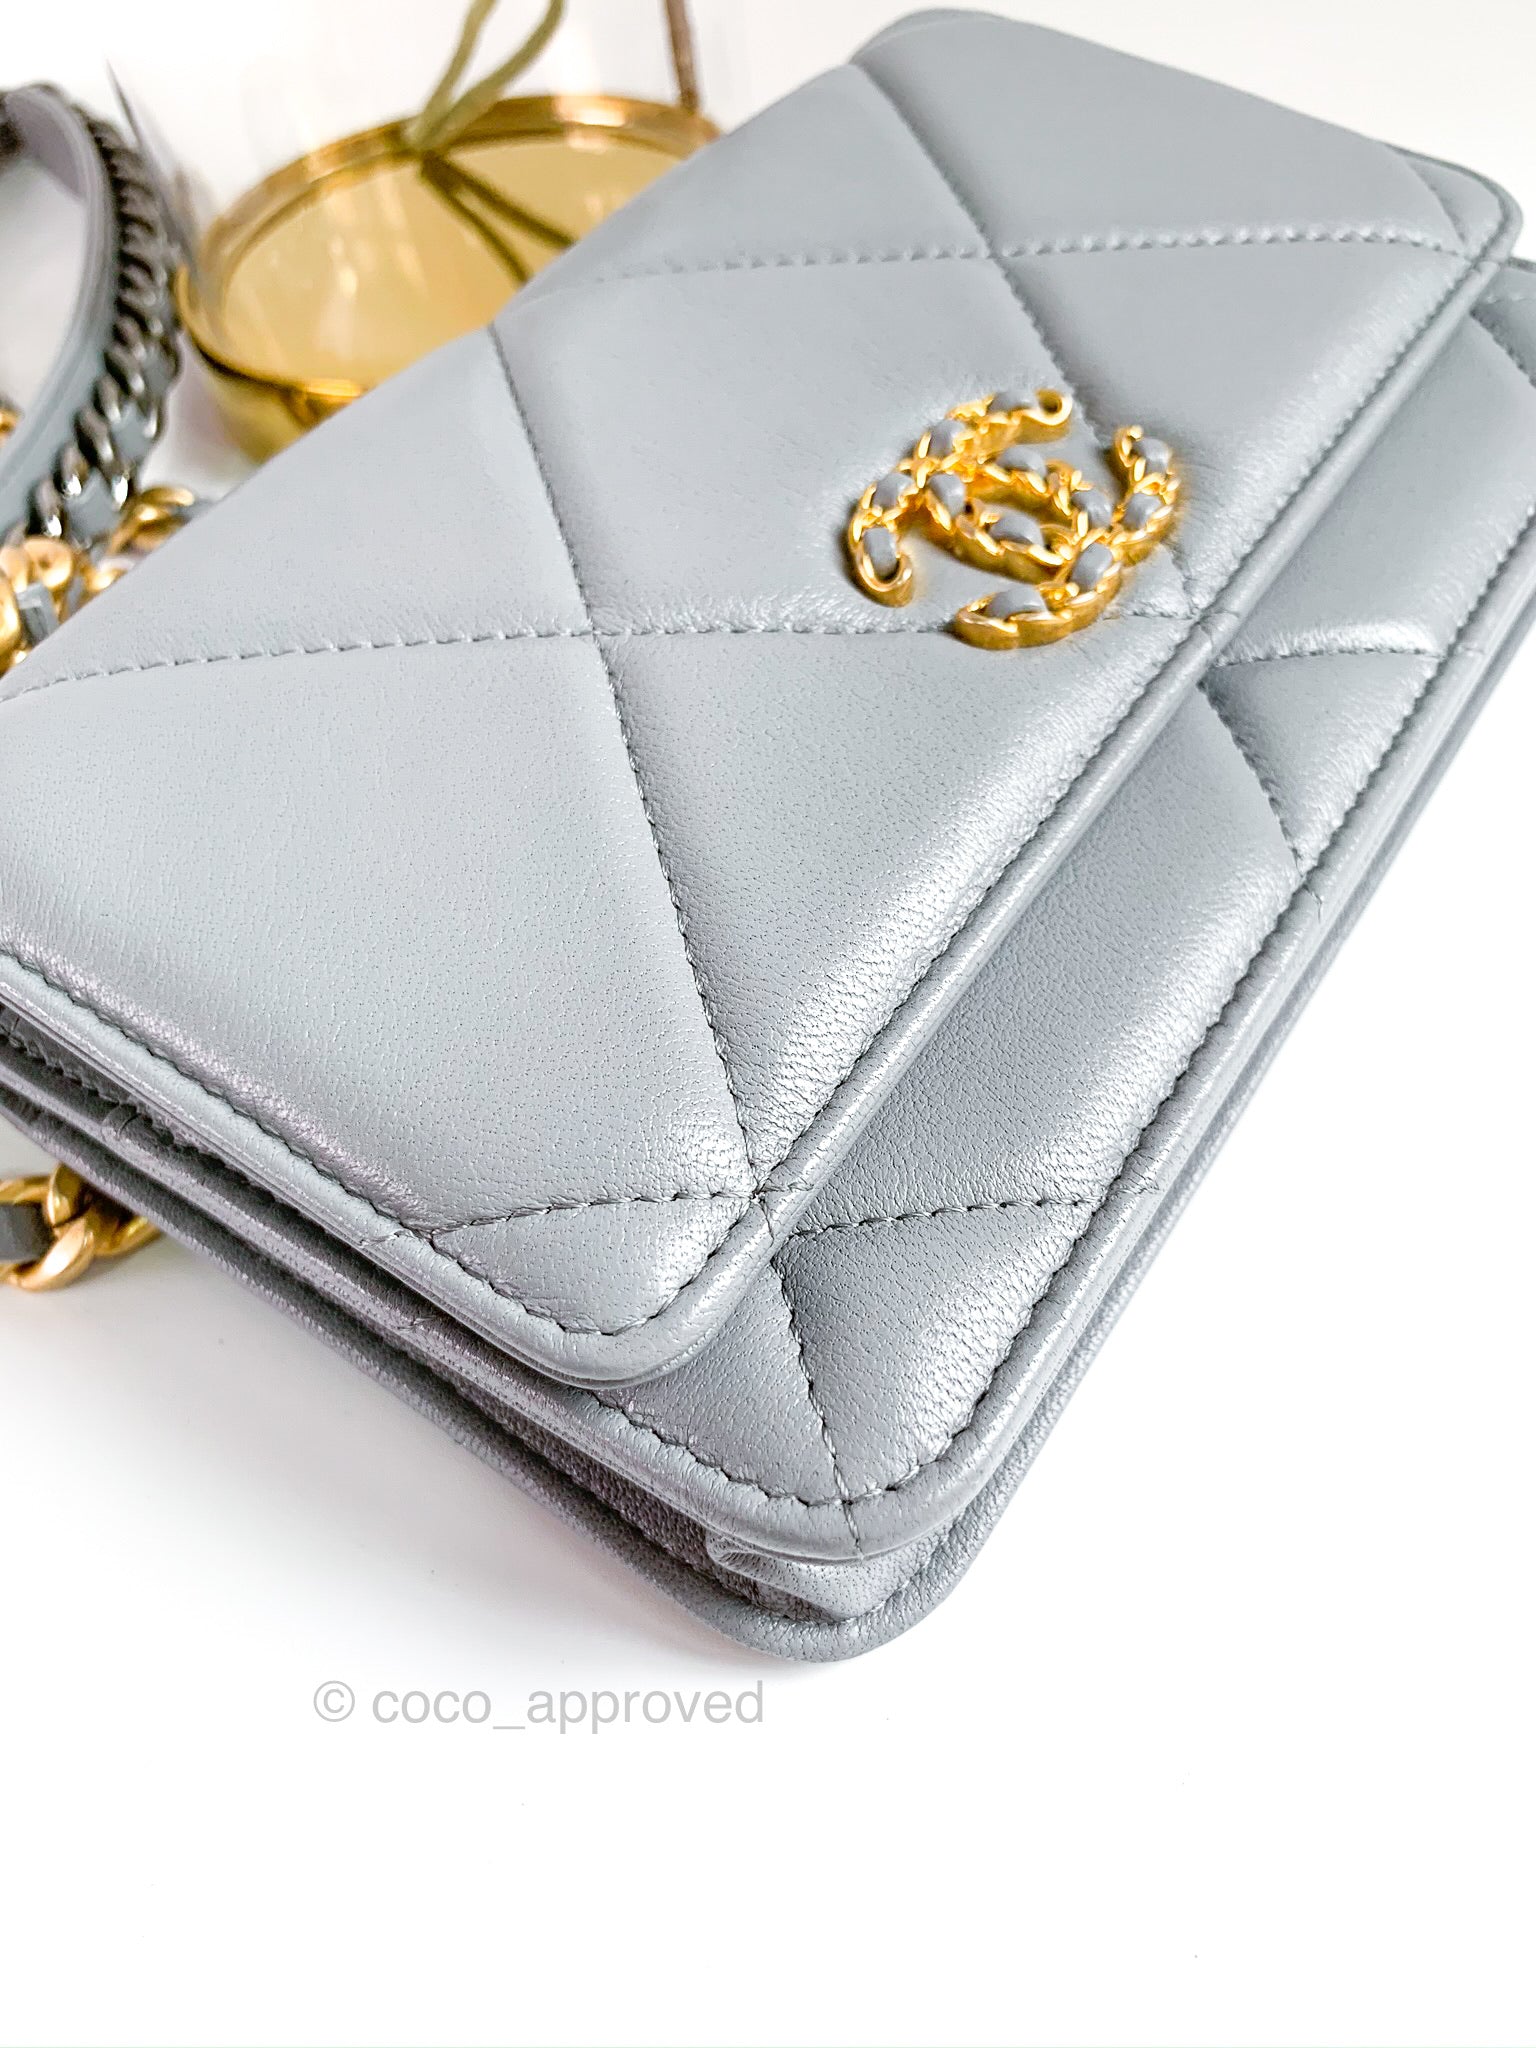 Chanel CHANEL 19 Shiny Lambskin Zip-Around Coin Purse with Gold Hardware ( Wallets and Small Leather Goods,Wallets)